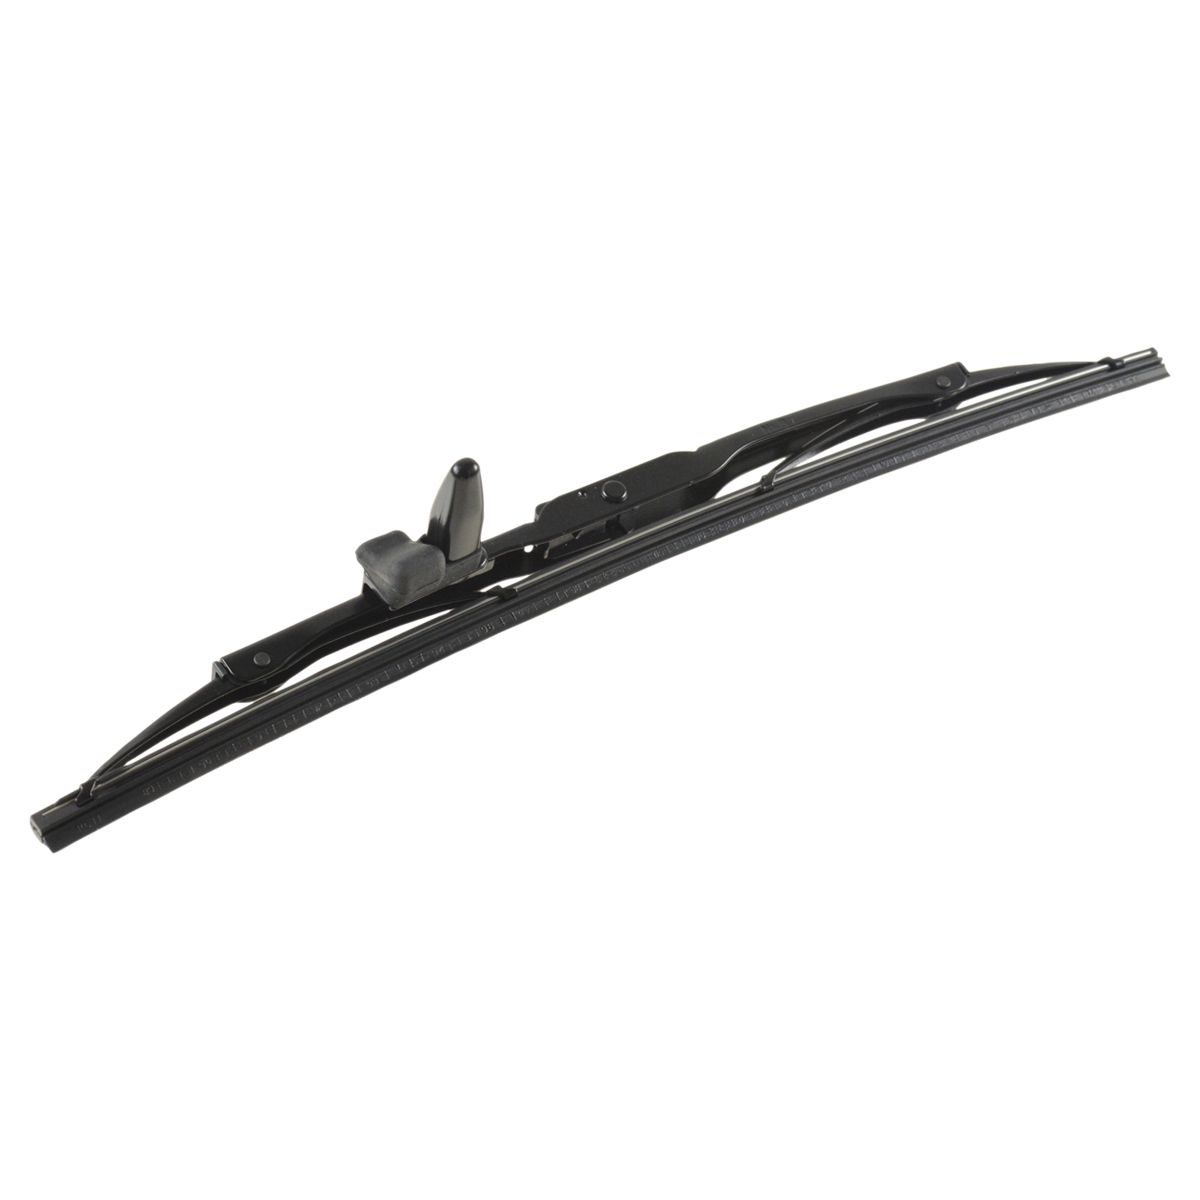 OEM 8524234011 Rear Wiper Blade Assembly Direct Fit for 01-07 Toyota Sequoia New | eBay 2008 Toyota Sequoia Rear Wiper Blade Size